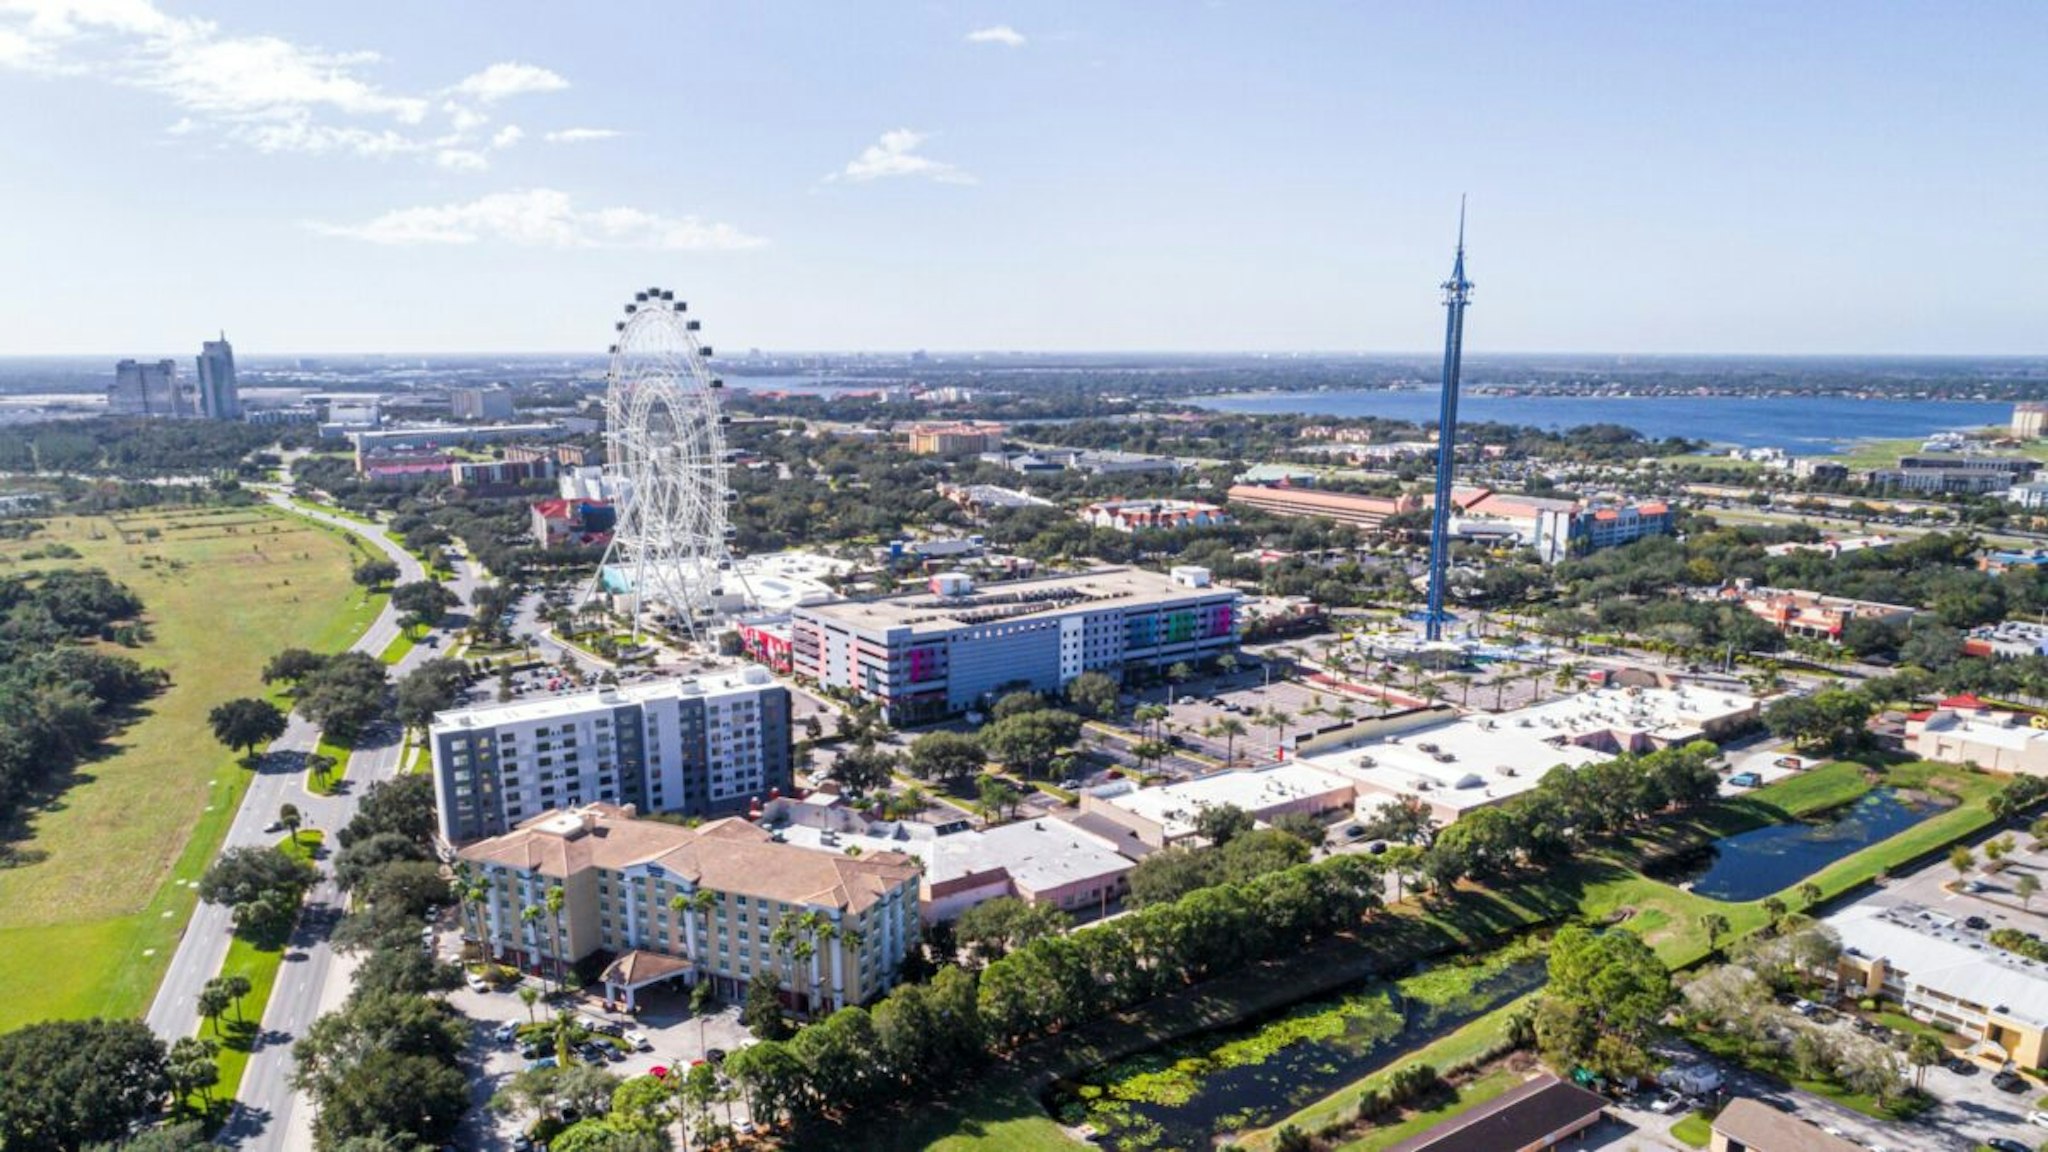 Florida, aerial view of The Wheel at ICON Park, Orlando Star flyer swing, amusement park ride.